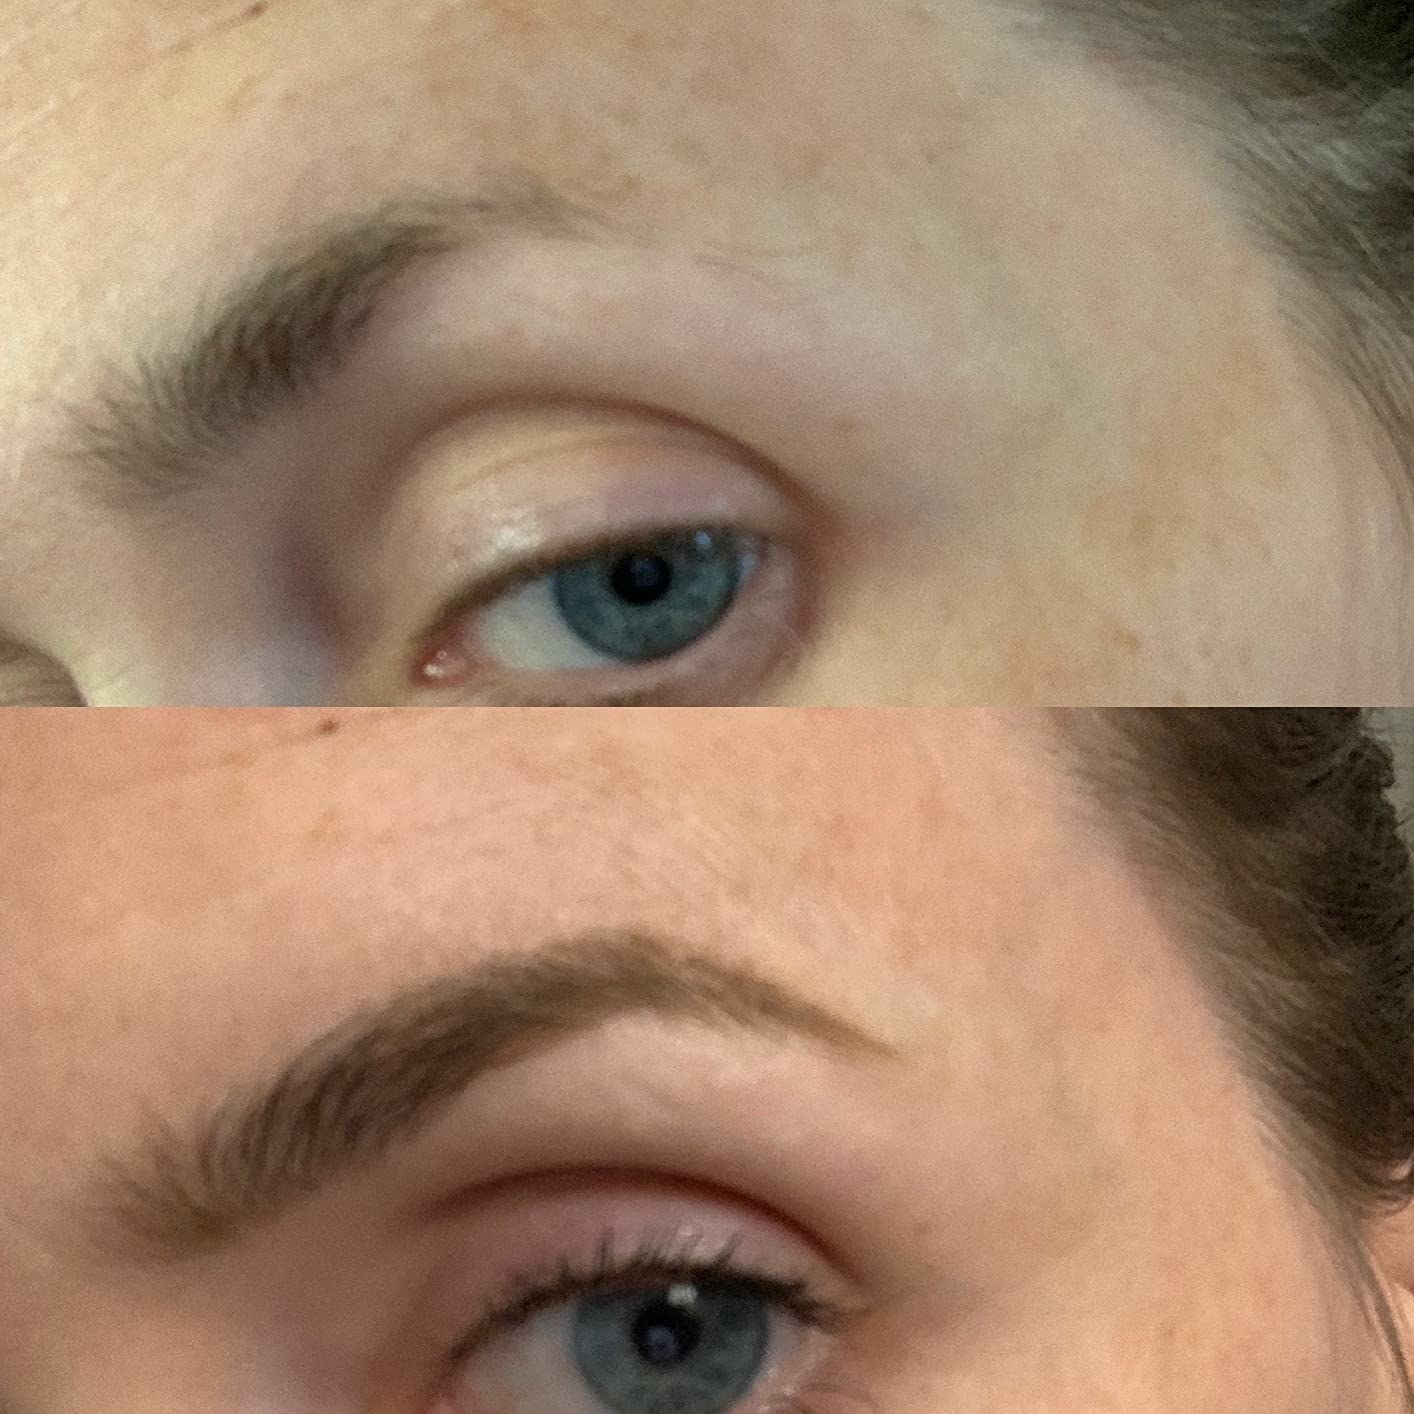 reviewer&#x27;s brow before and after filling it in with eyebrow pencil